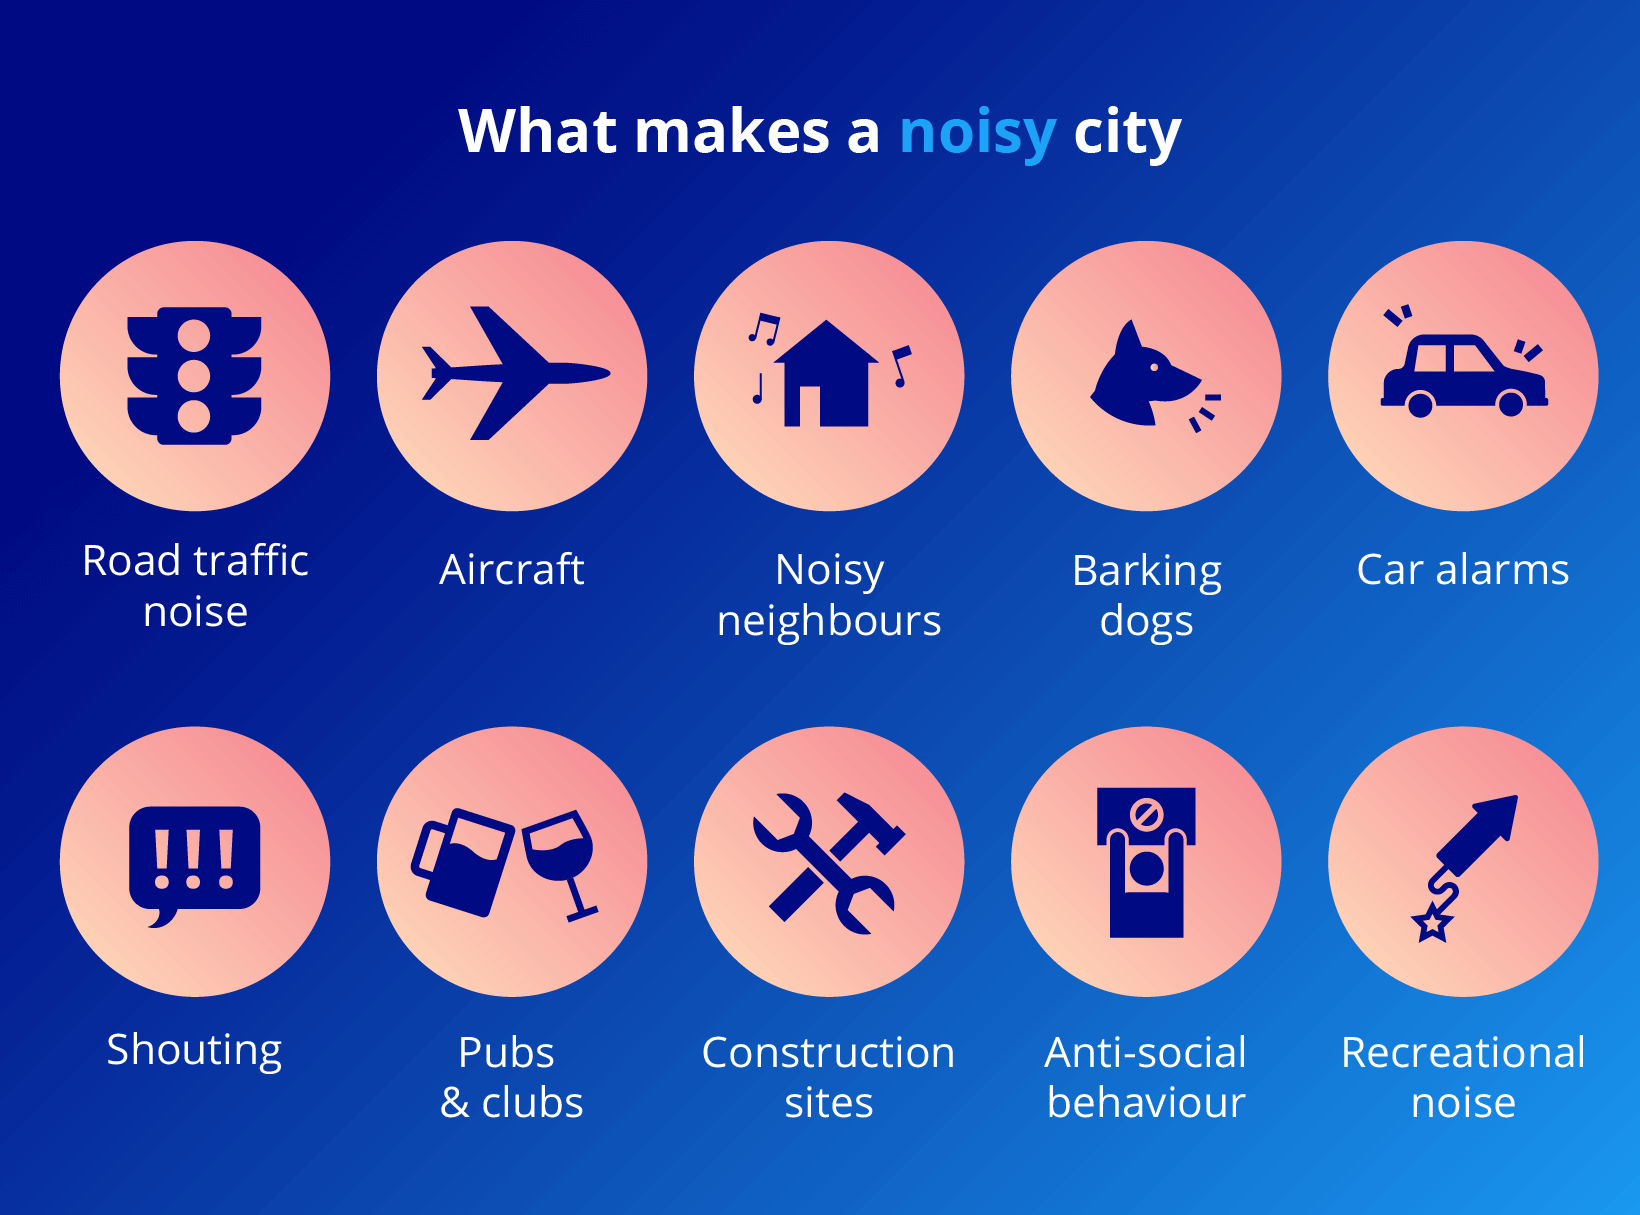 Icons showing different noise elements in a city